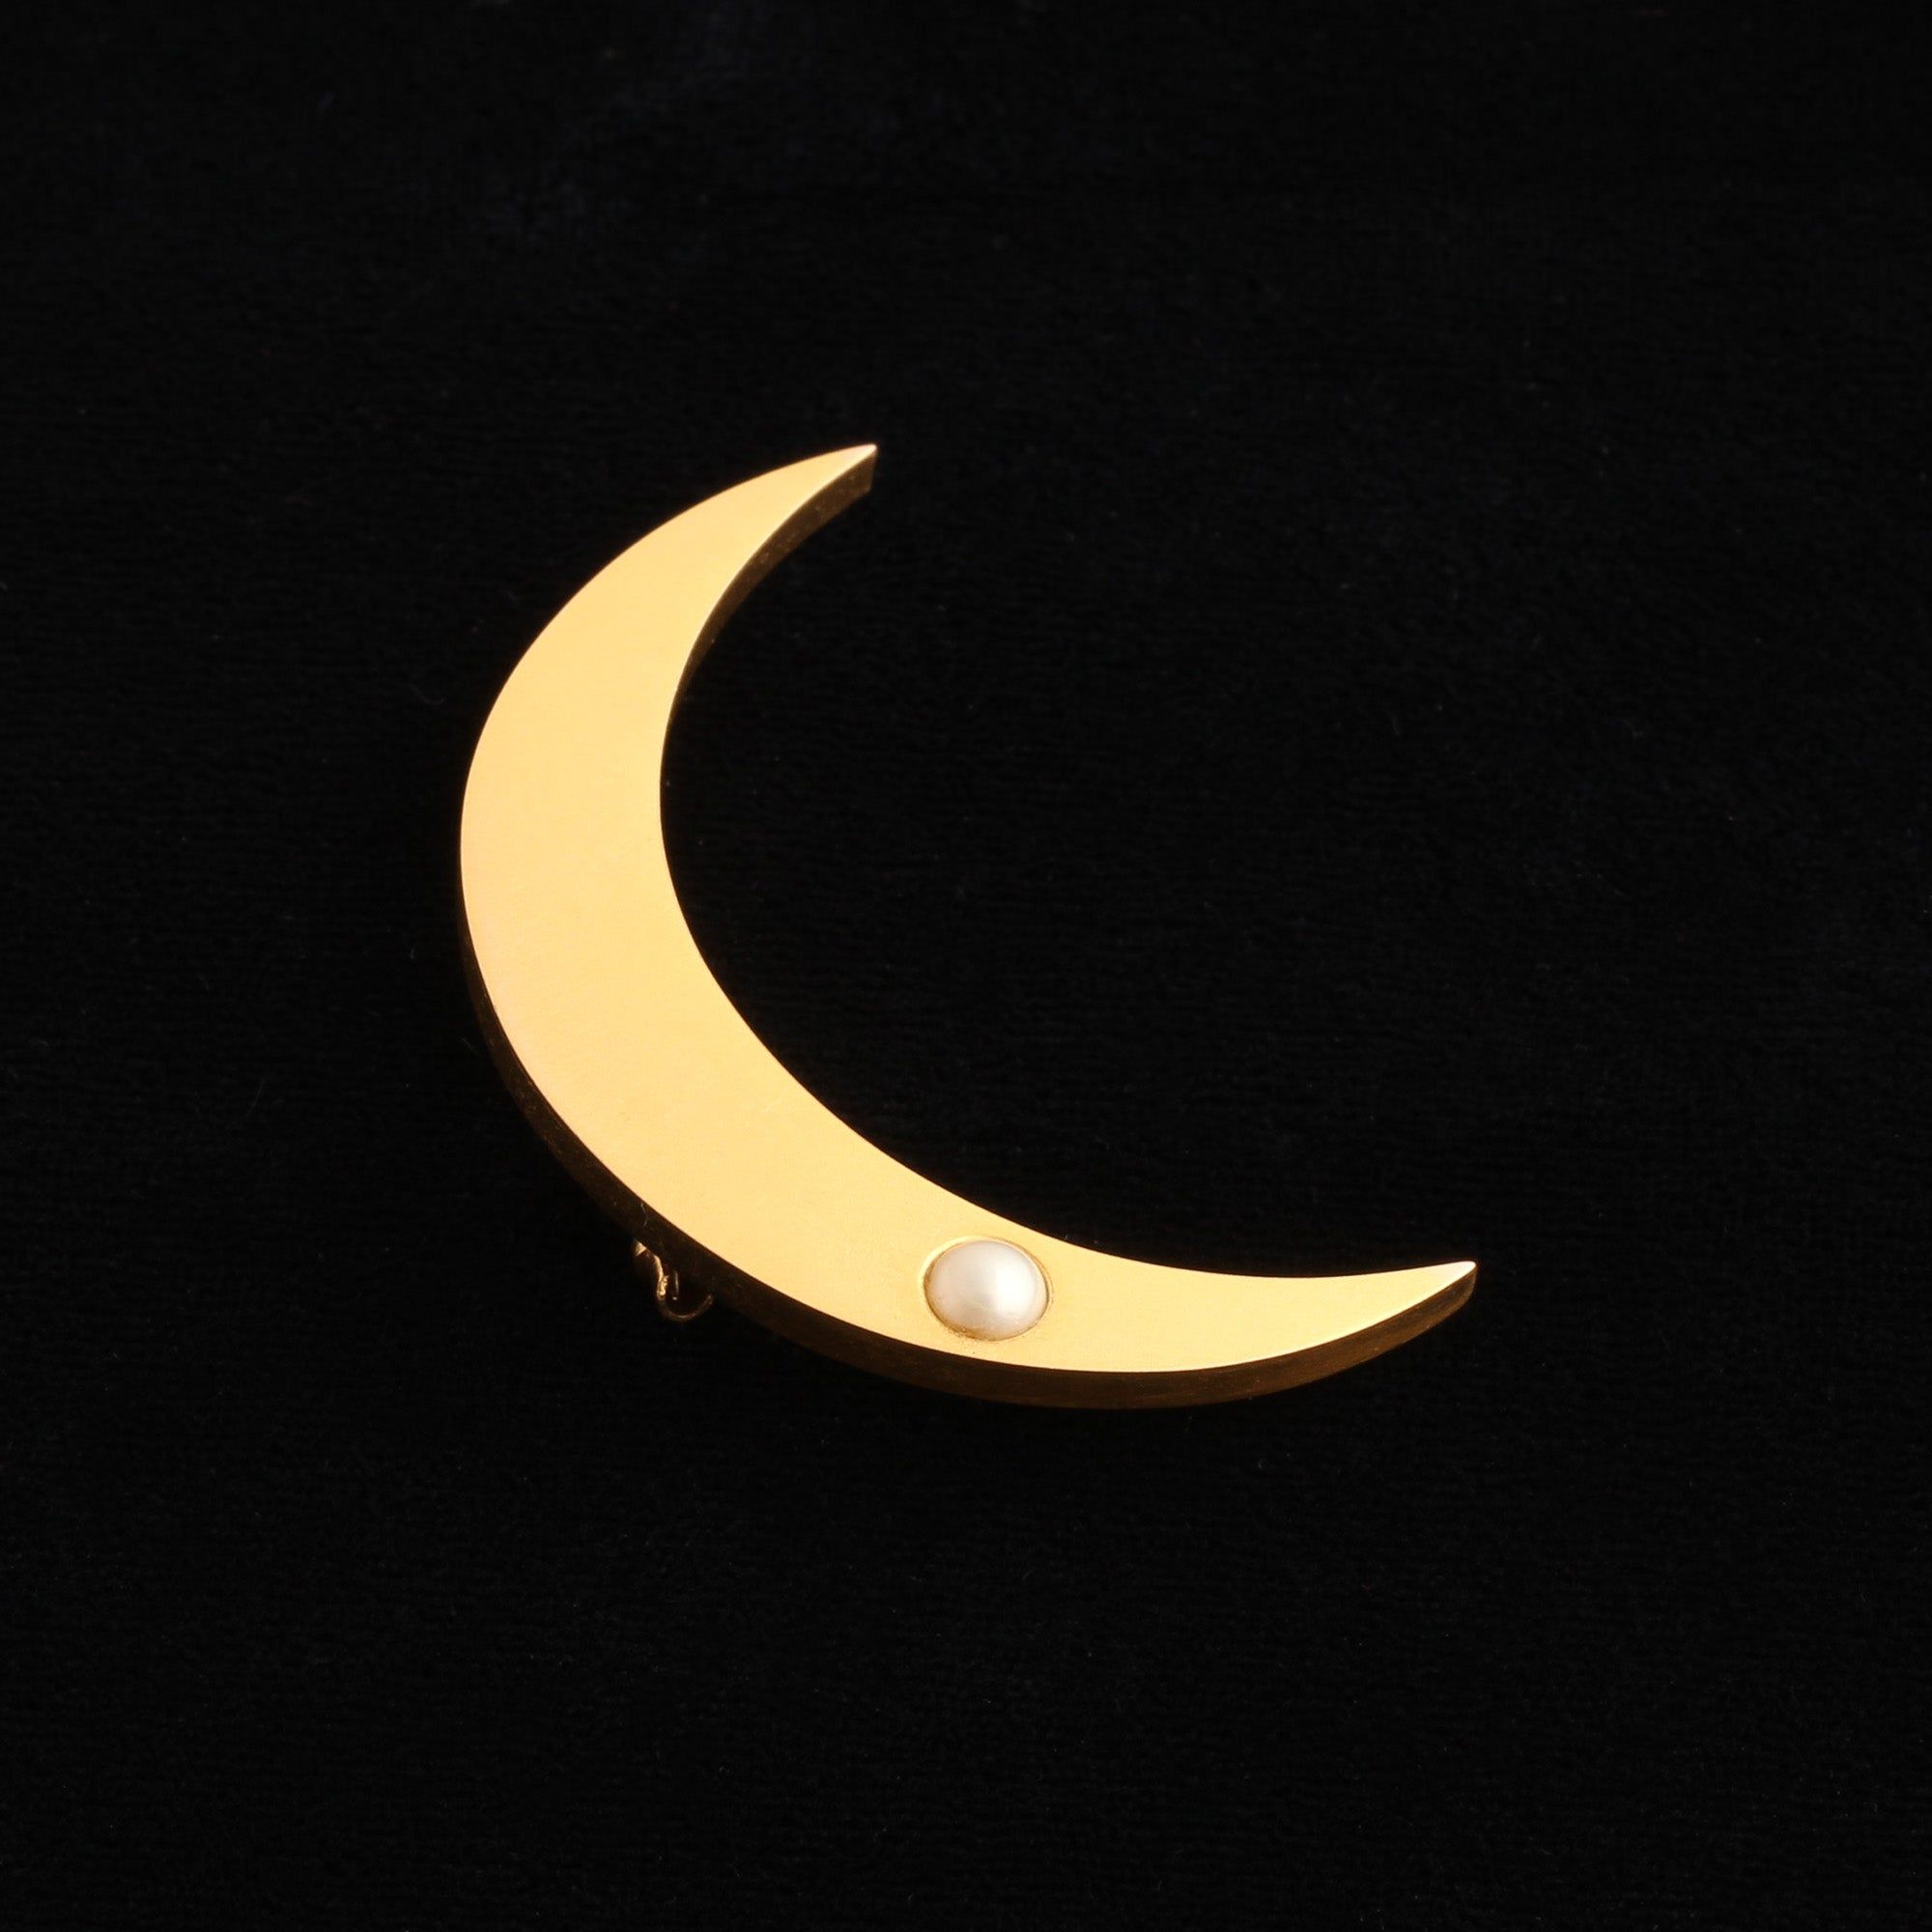 Detail of Victorian Crescent Moon Brooch